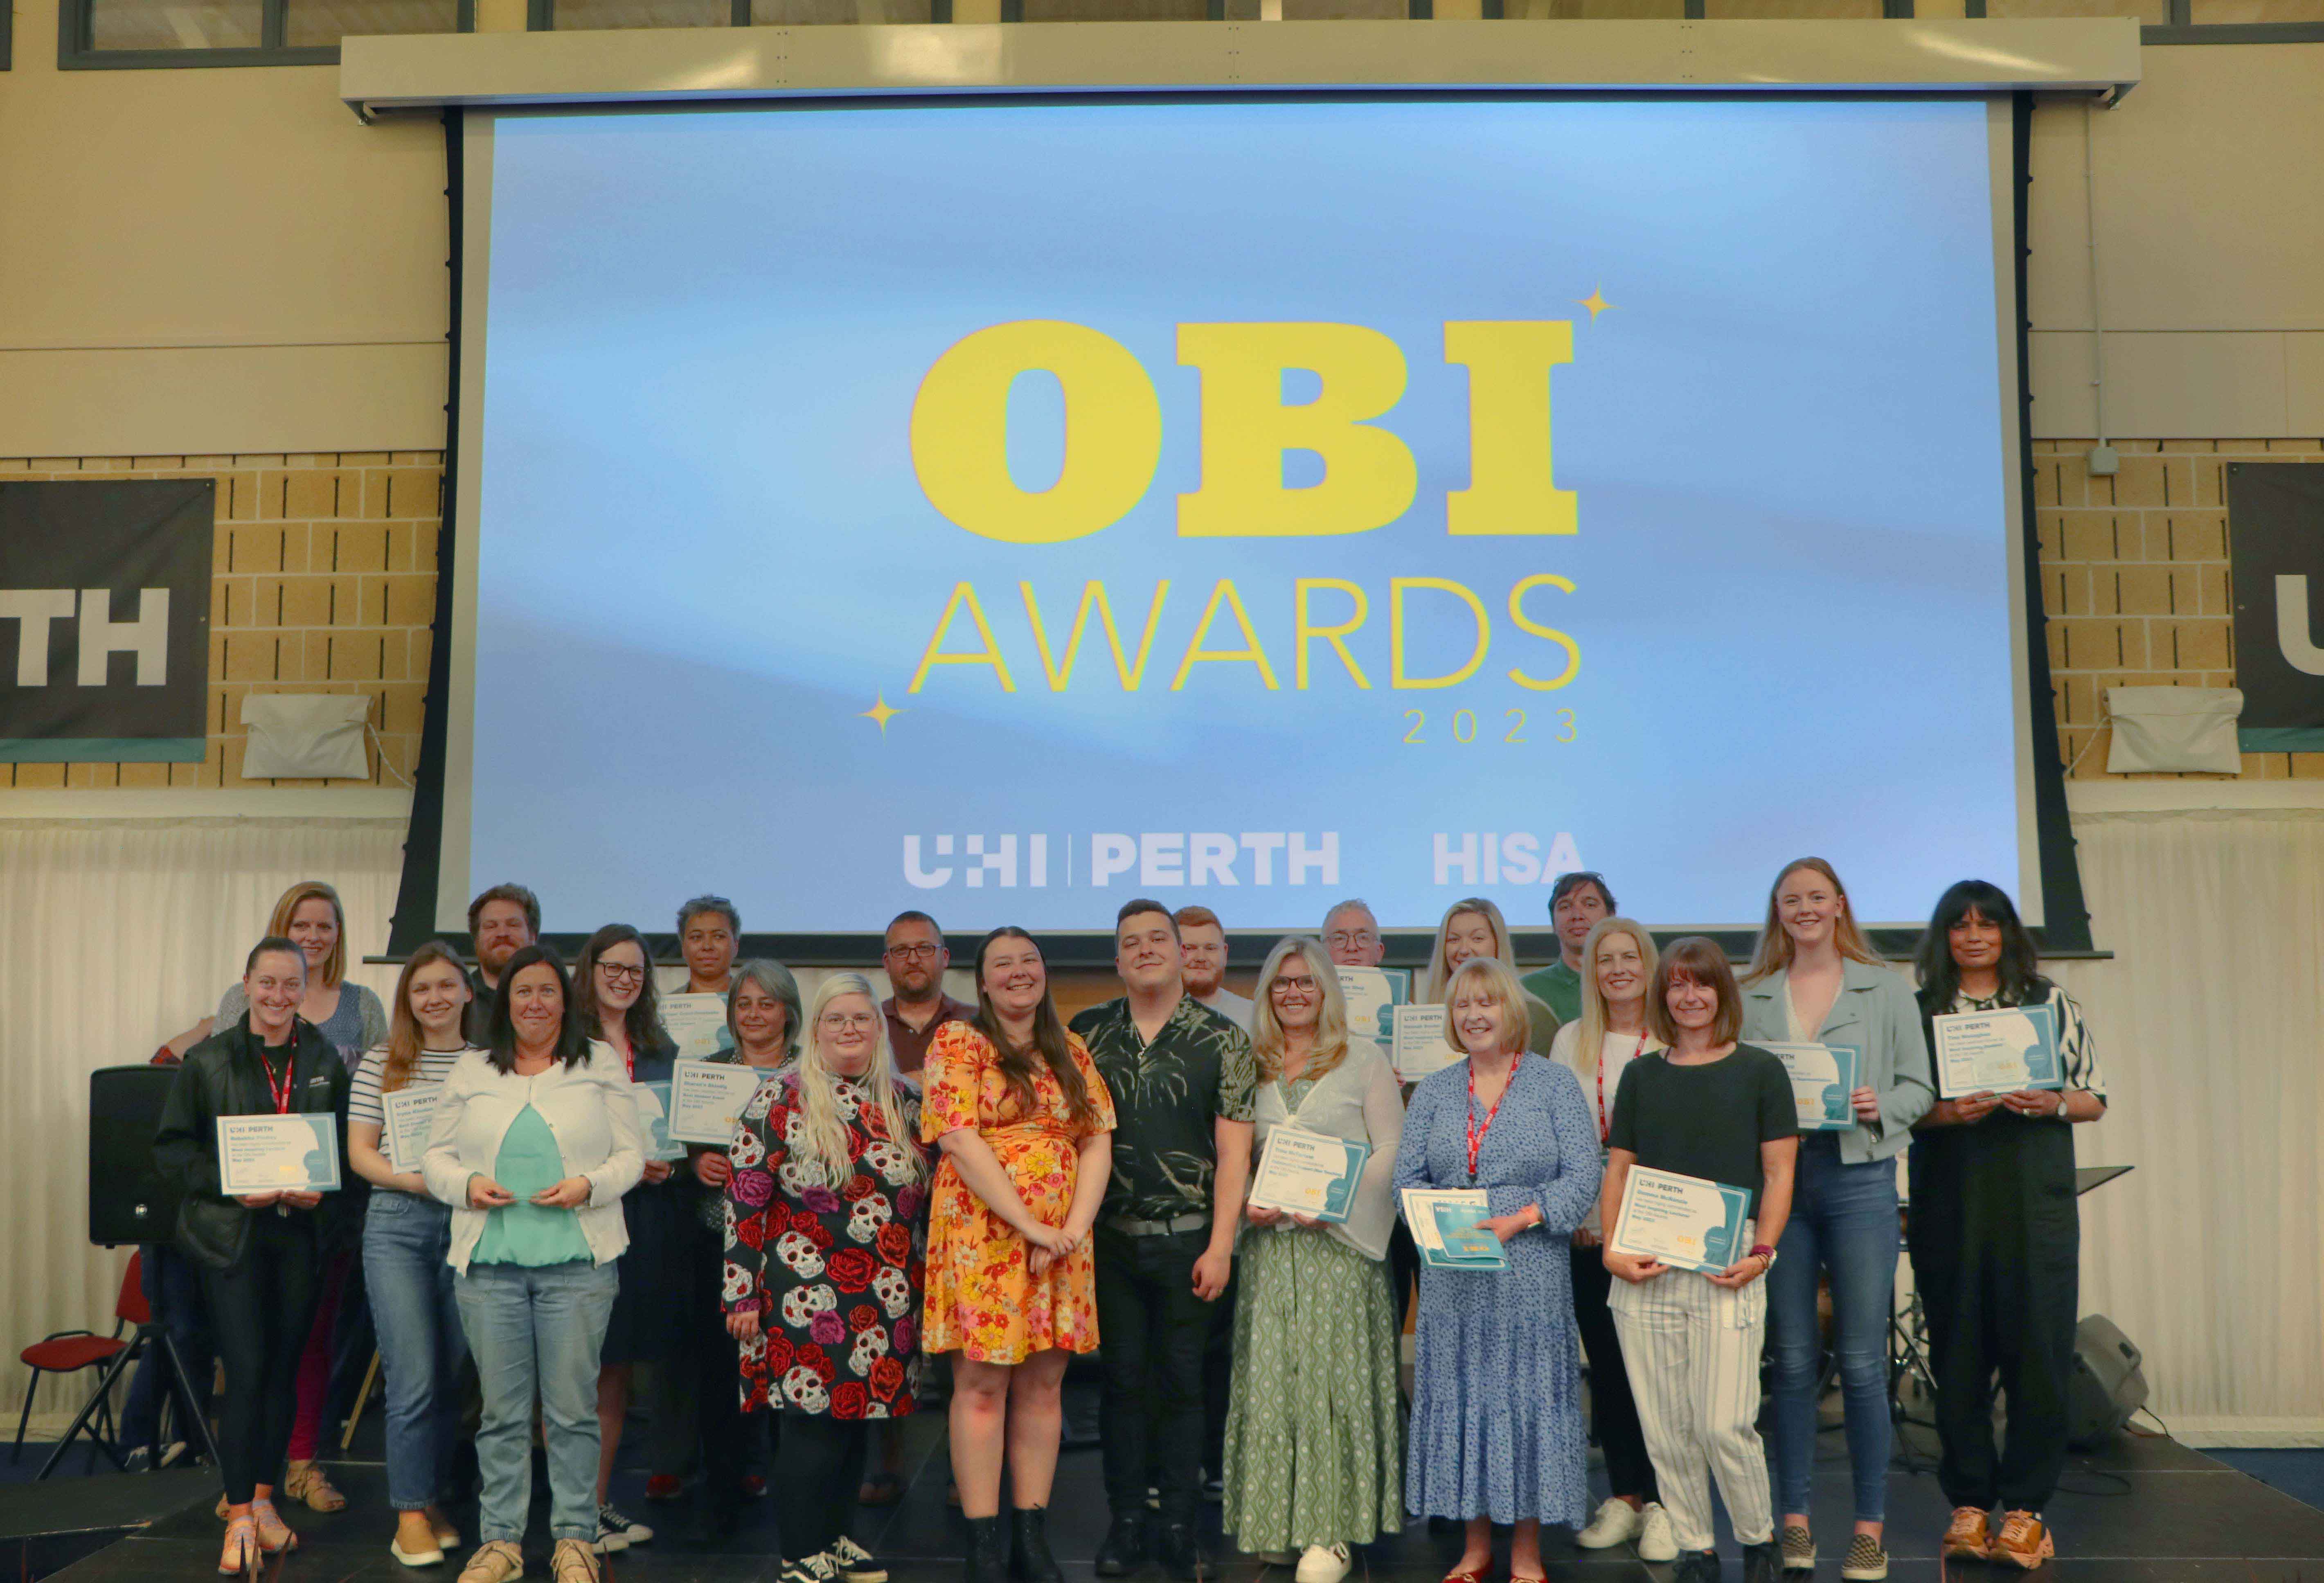 Awards event honours stand-out students and staff